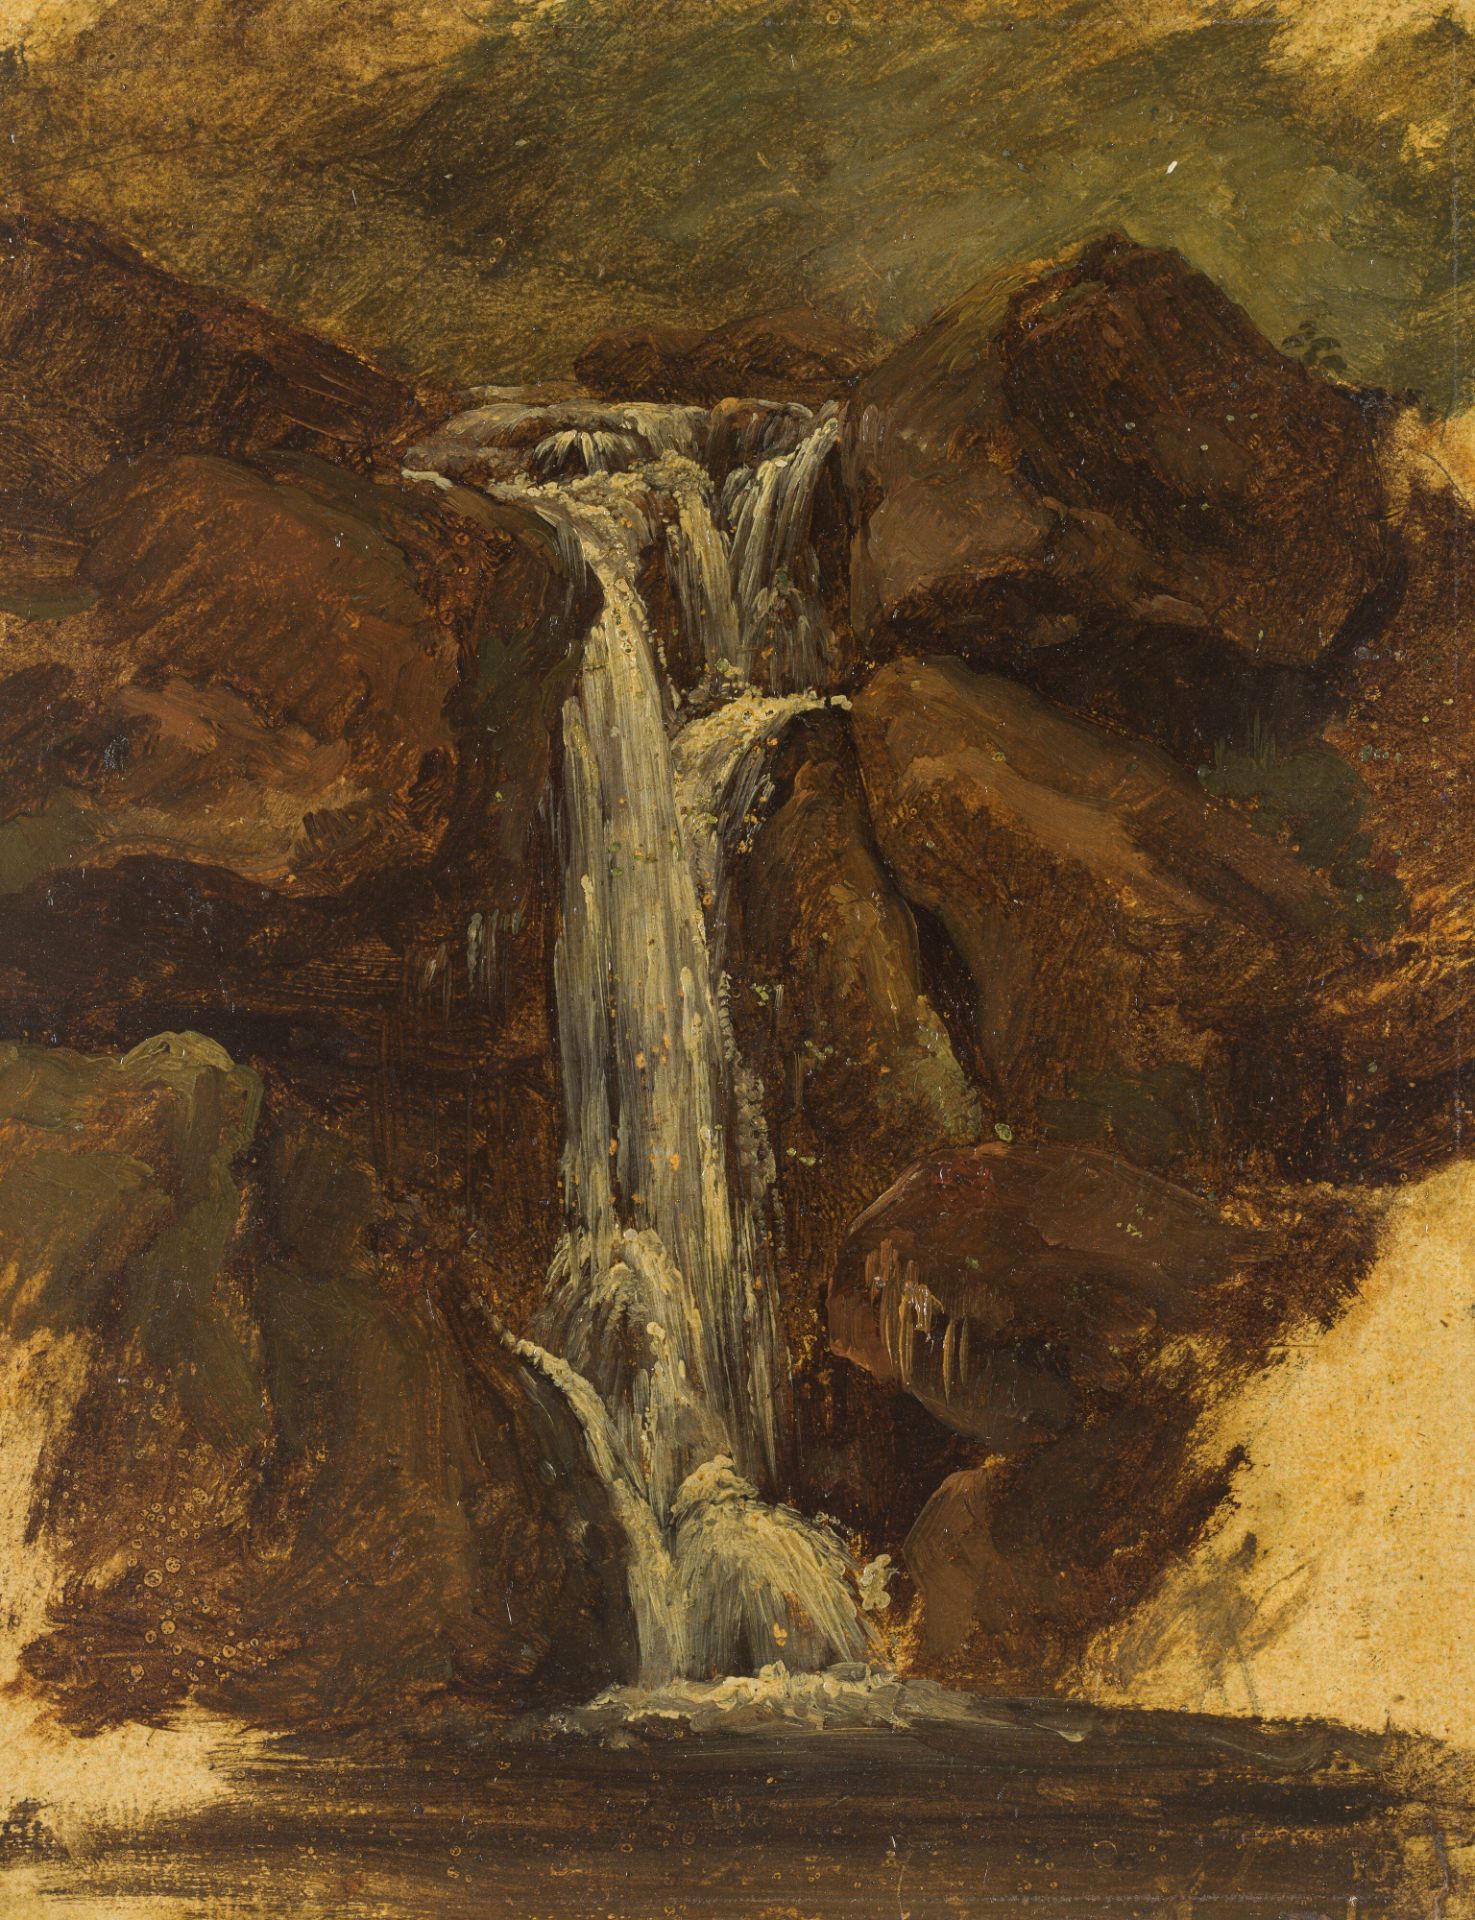 Friedrich GauermannWaterfall (nature study)oil on paper; framed23.5 x 18.5 cmauction house Wawra,